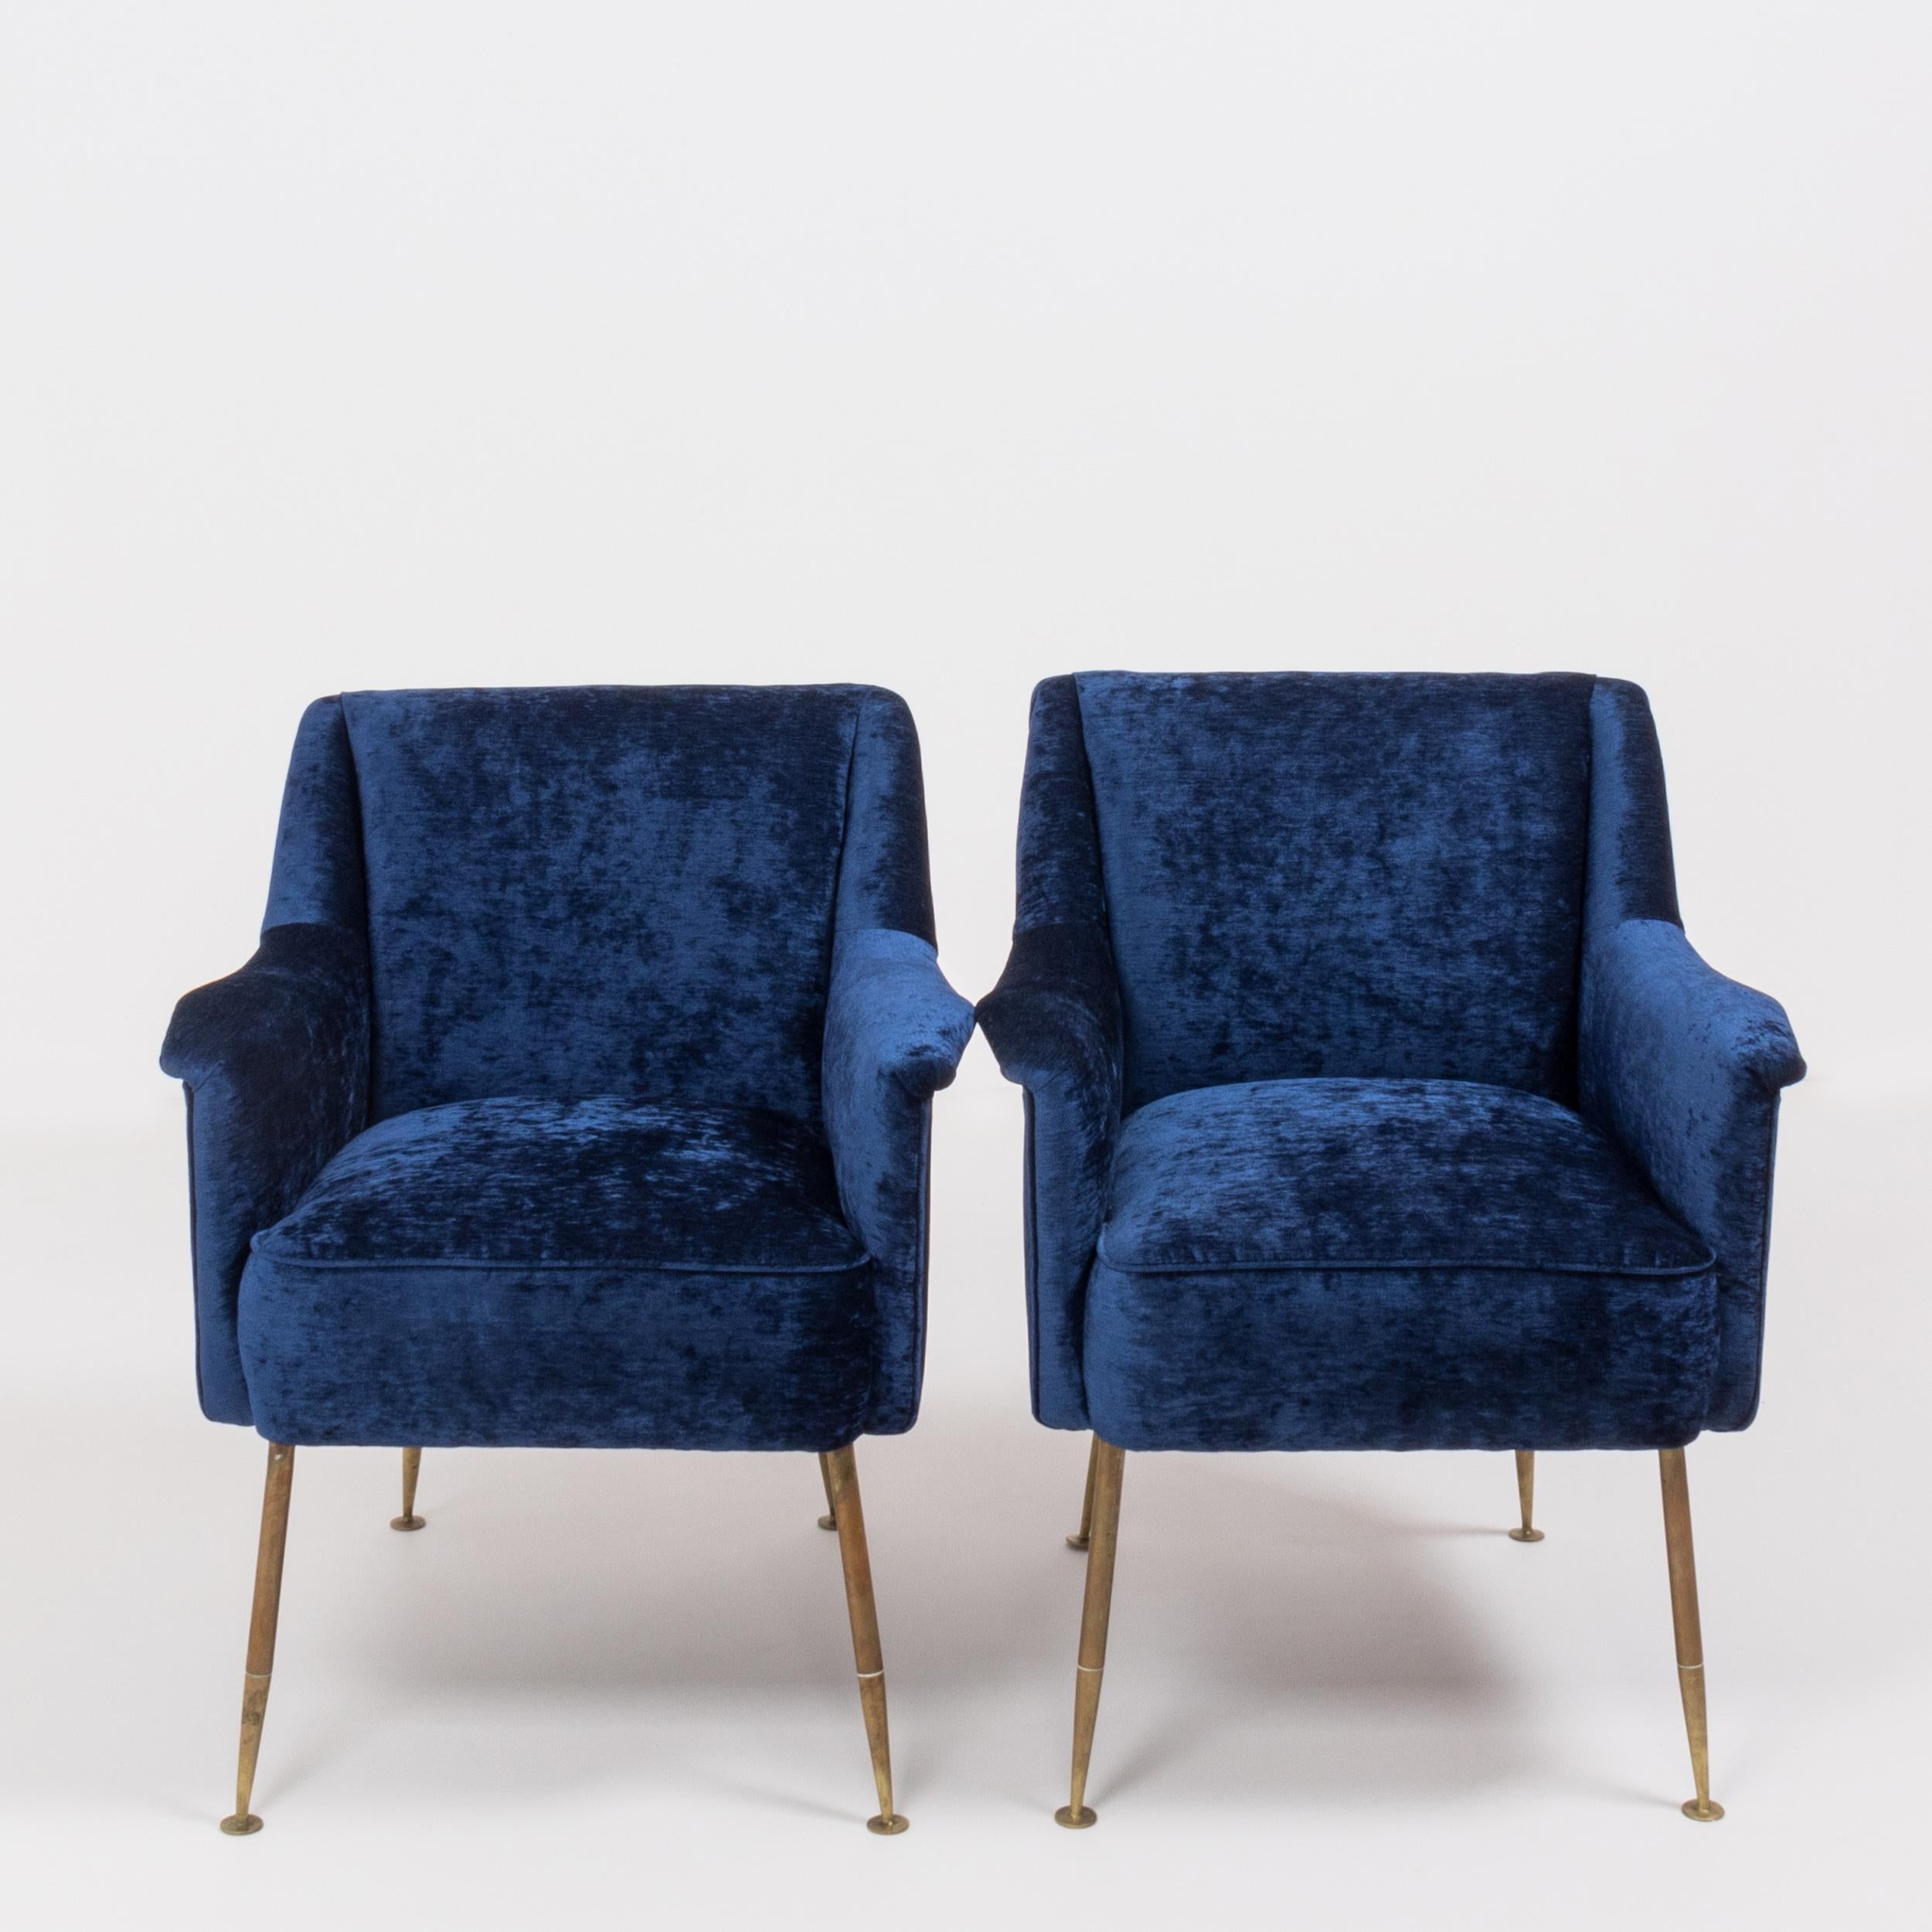 A beautifully designed pair of midcentury armchairs in blue velvet designed by Carlo Pagani

Camelia by Carlo Pagani, Italy, 1951.
Manufactured by Arflex. Reupholstered in sumptuous blue velvet, the chairs have deep, comfortable seats and brass